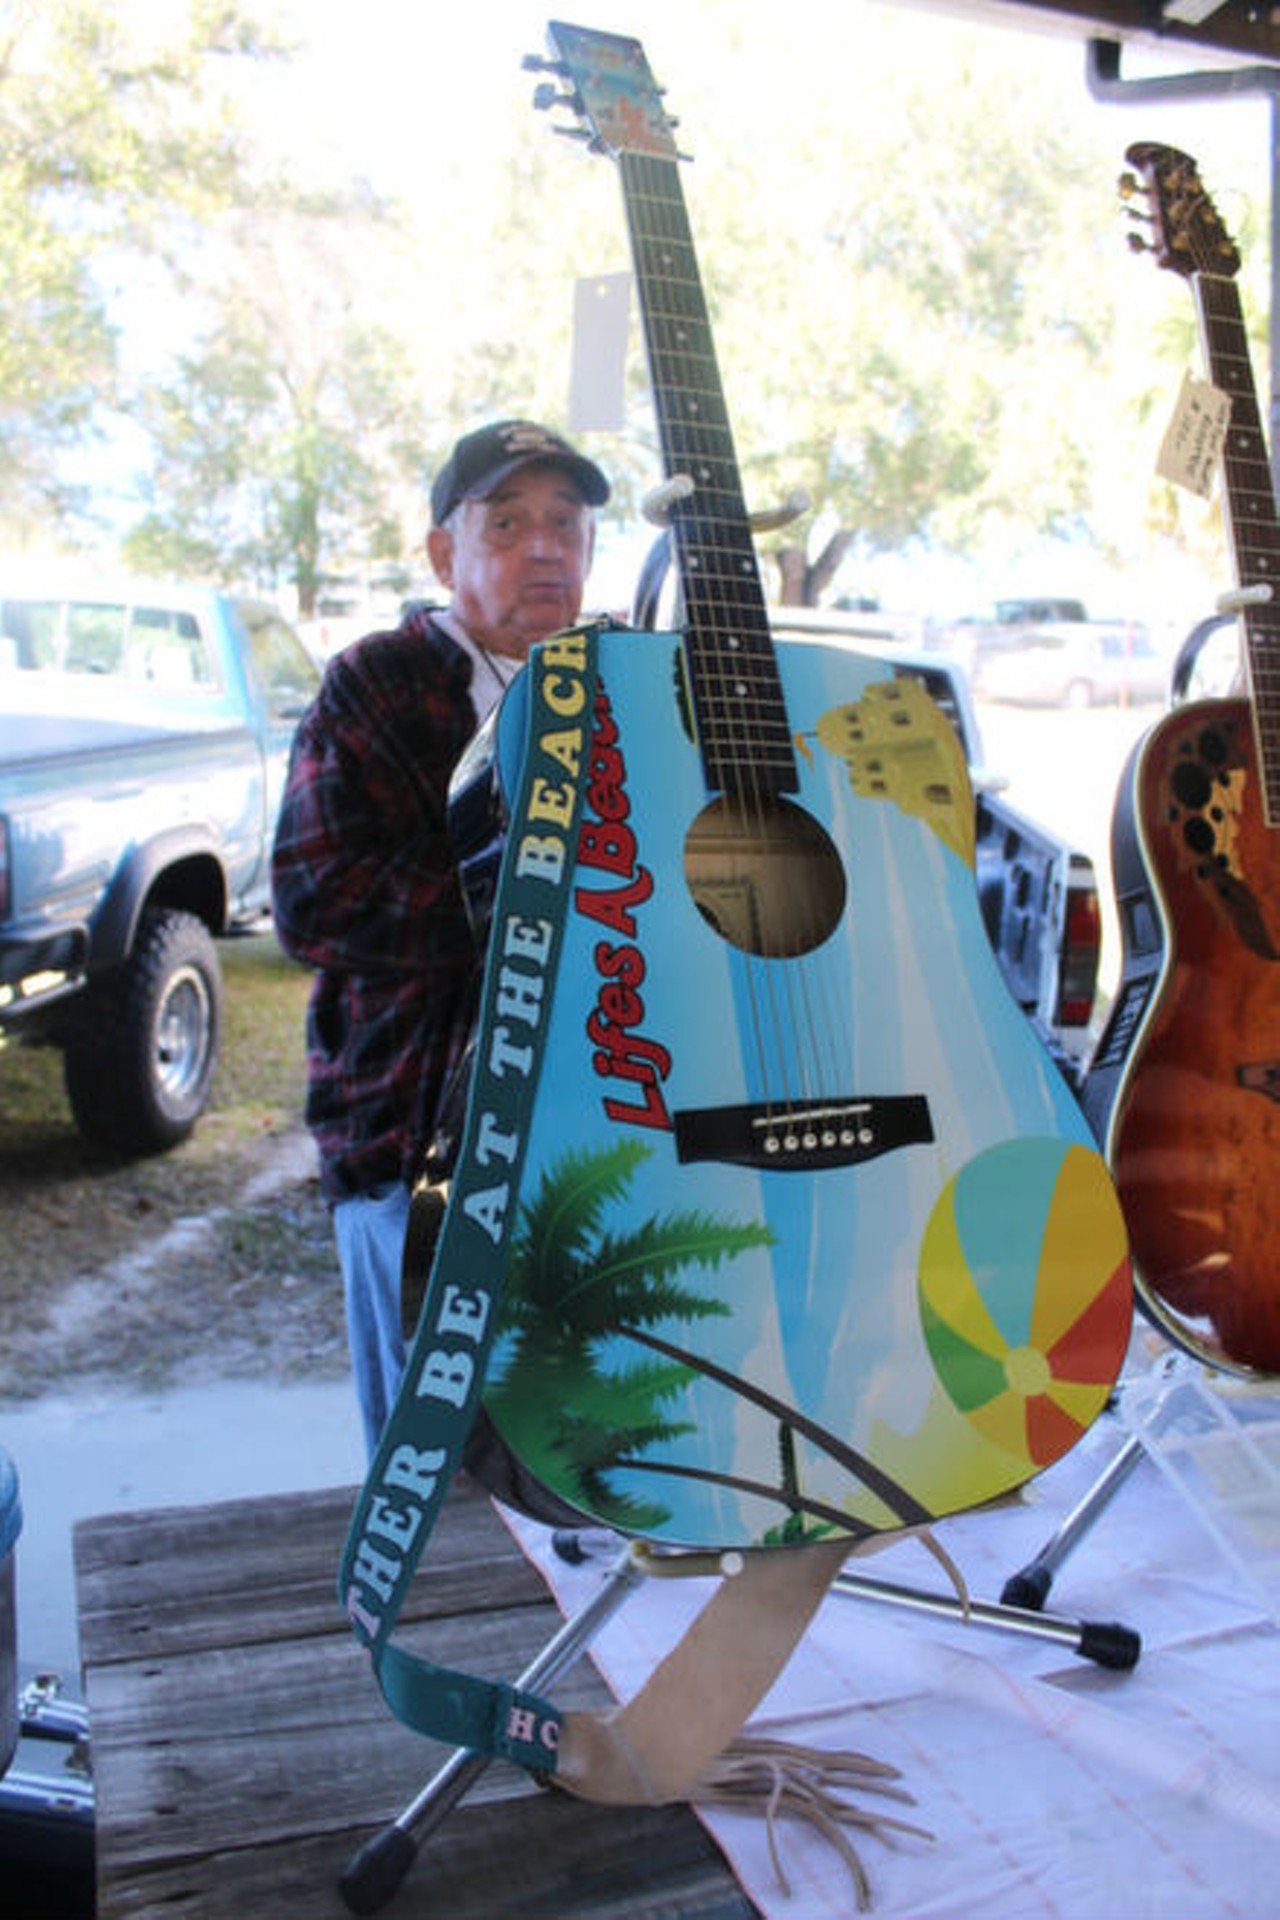 Guitars and Cars: 36 photos from the musicians' swap meet at Renningers